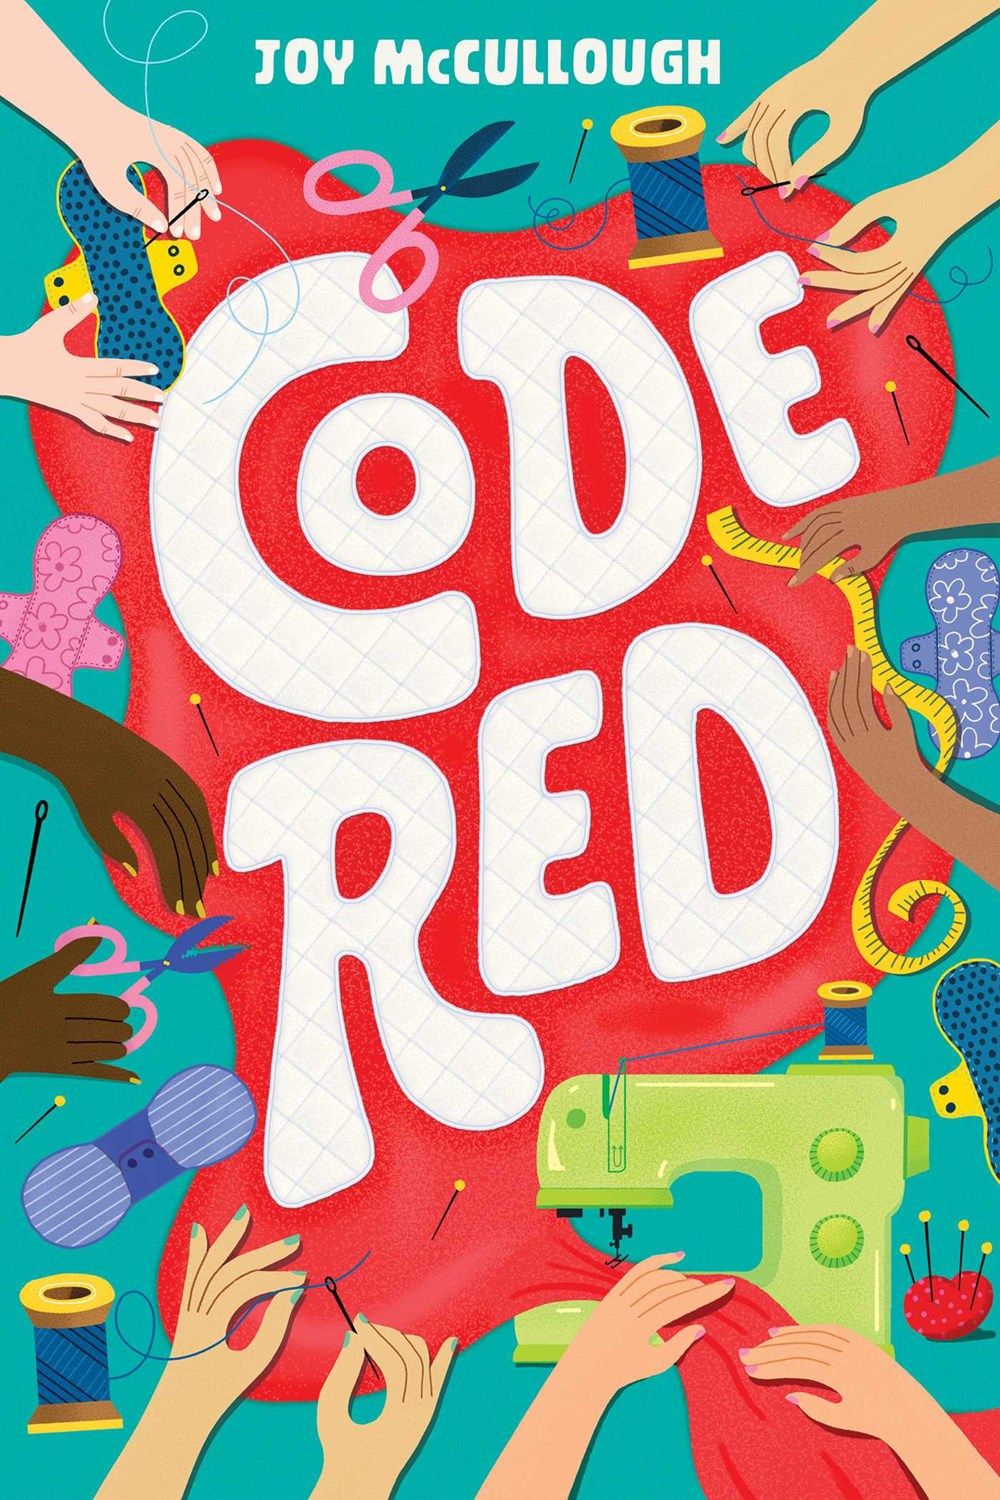 Cover of Code Red by McCullough